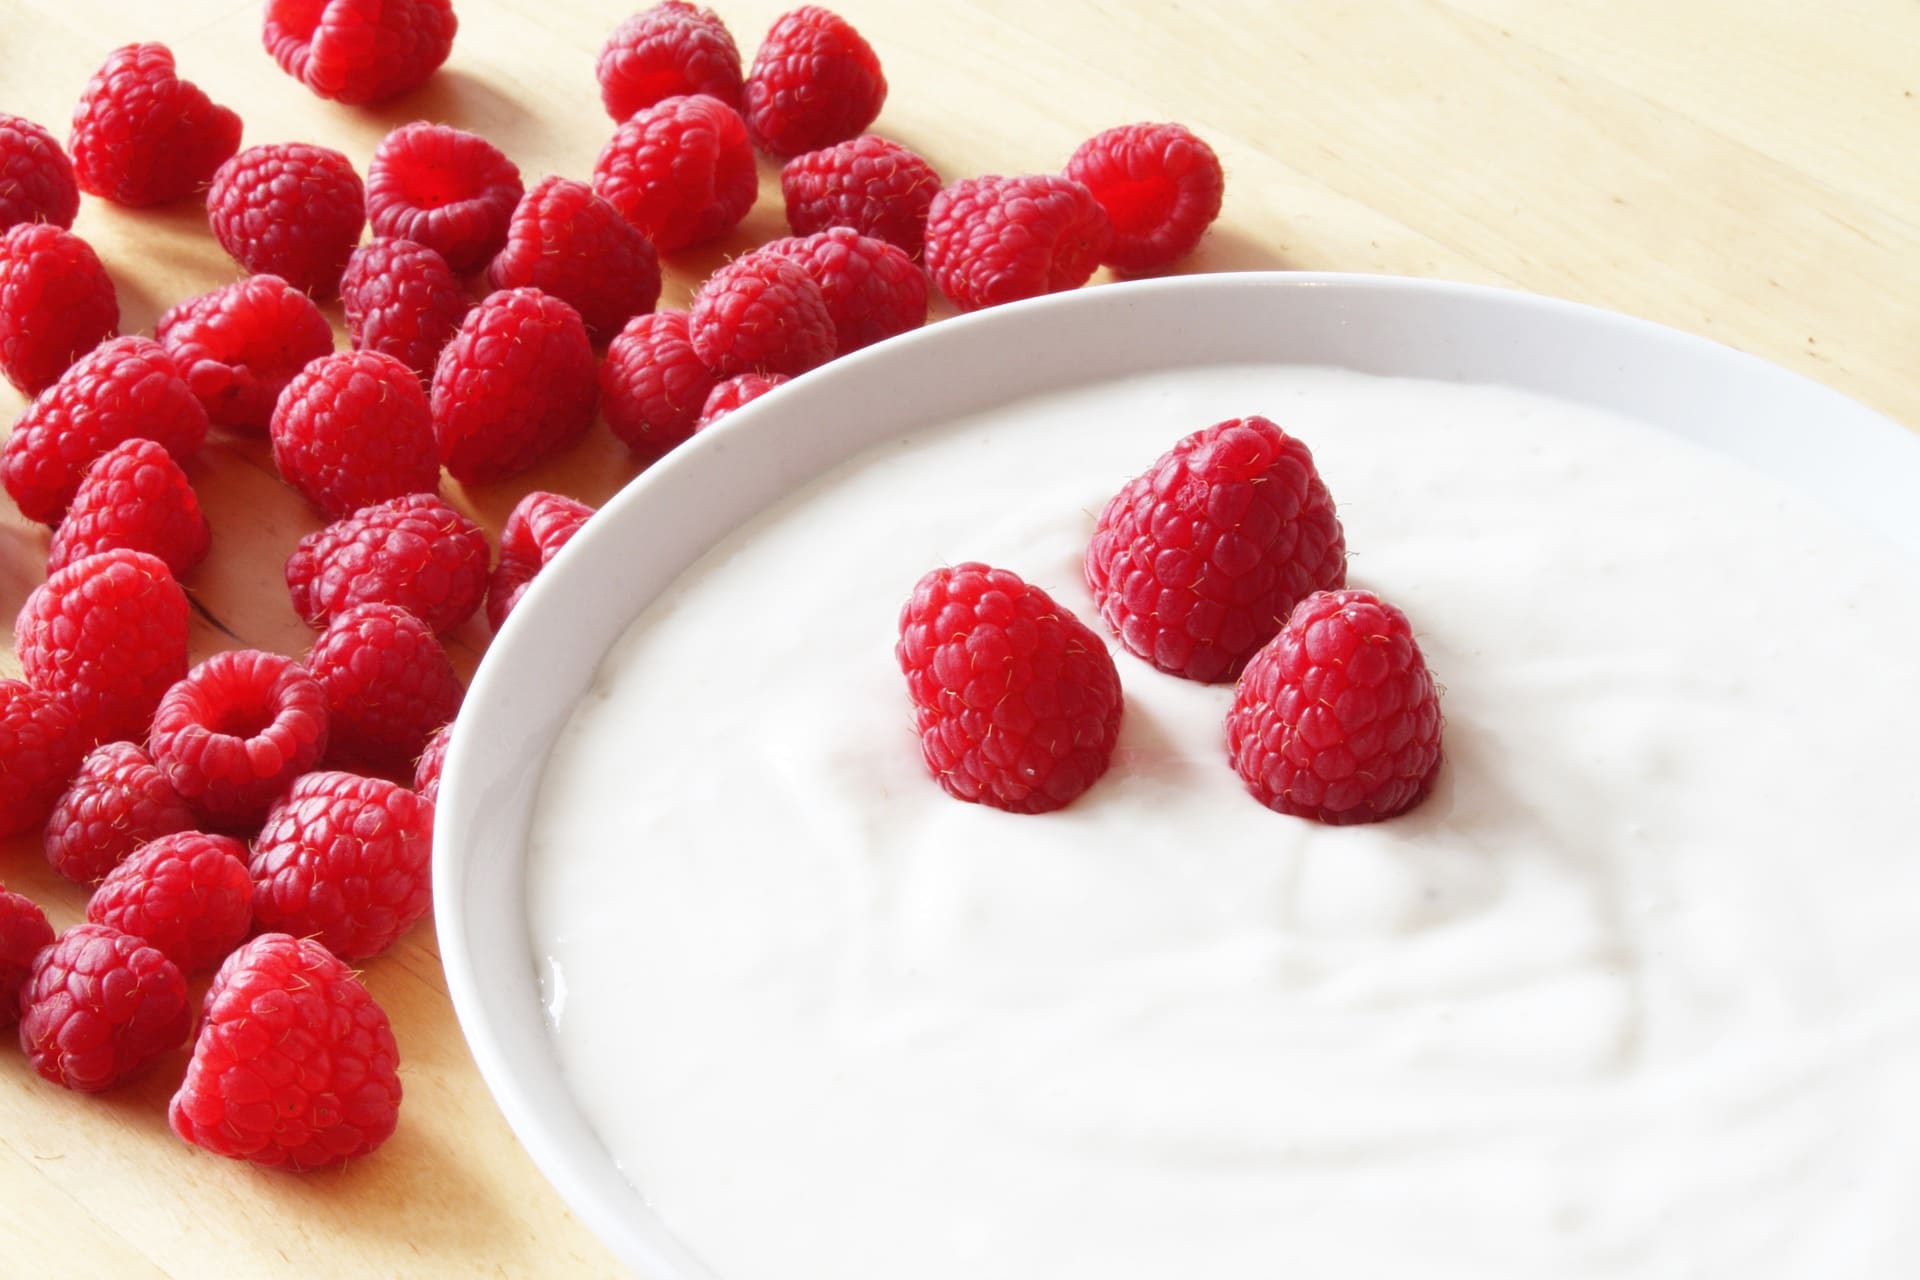 Curd For Acne & Pimples: Benefits Of Yogurt For Skin & Hair